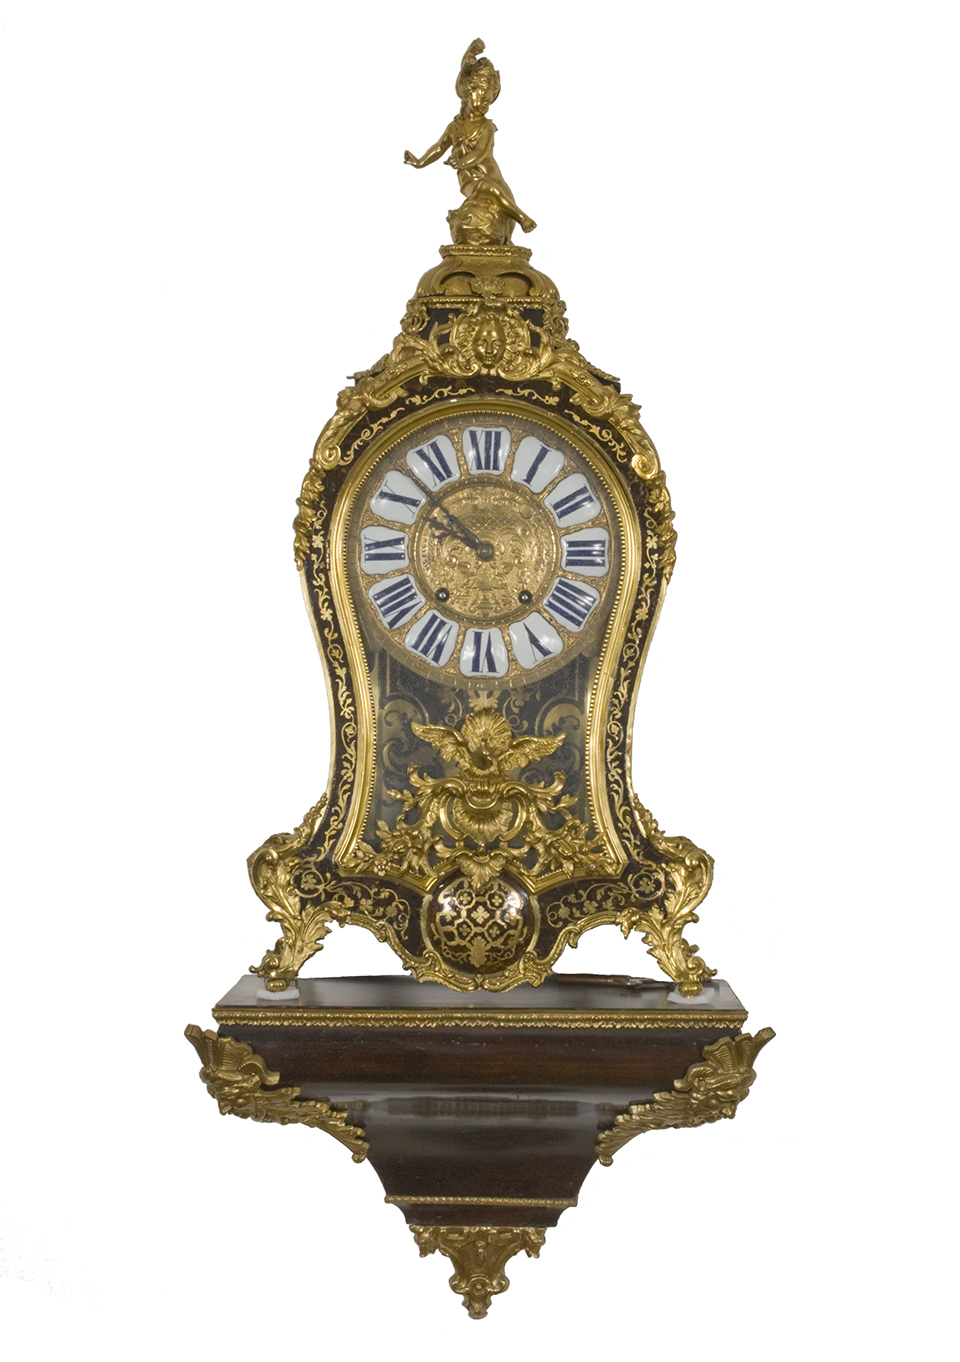 An 18th century clock in the Louis XIV style, with brass and tortoiseshell inlay.